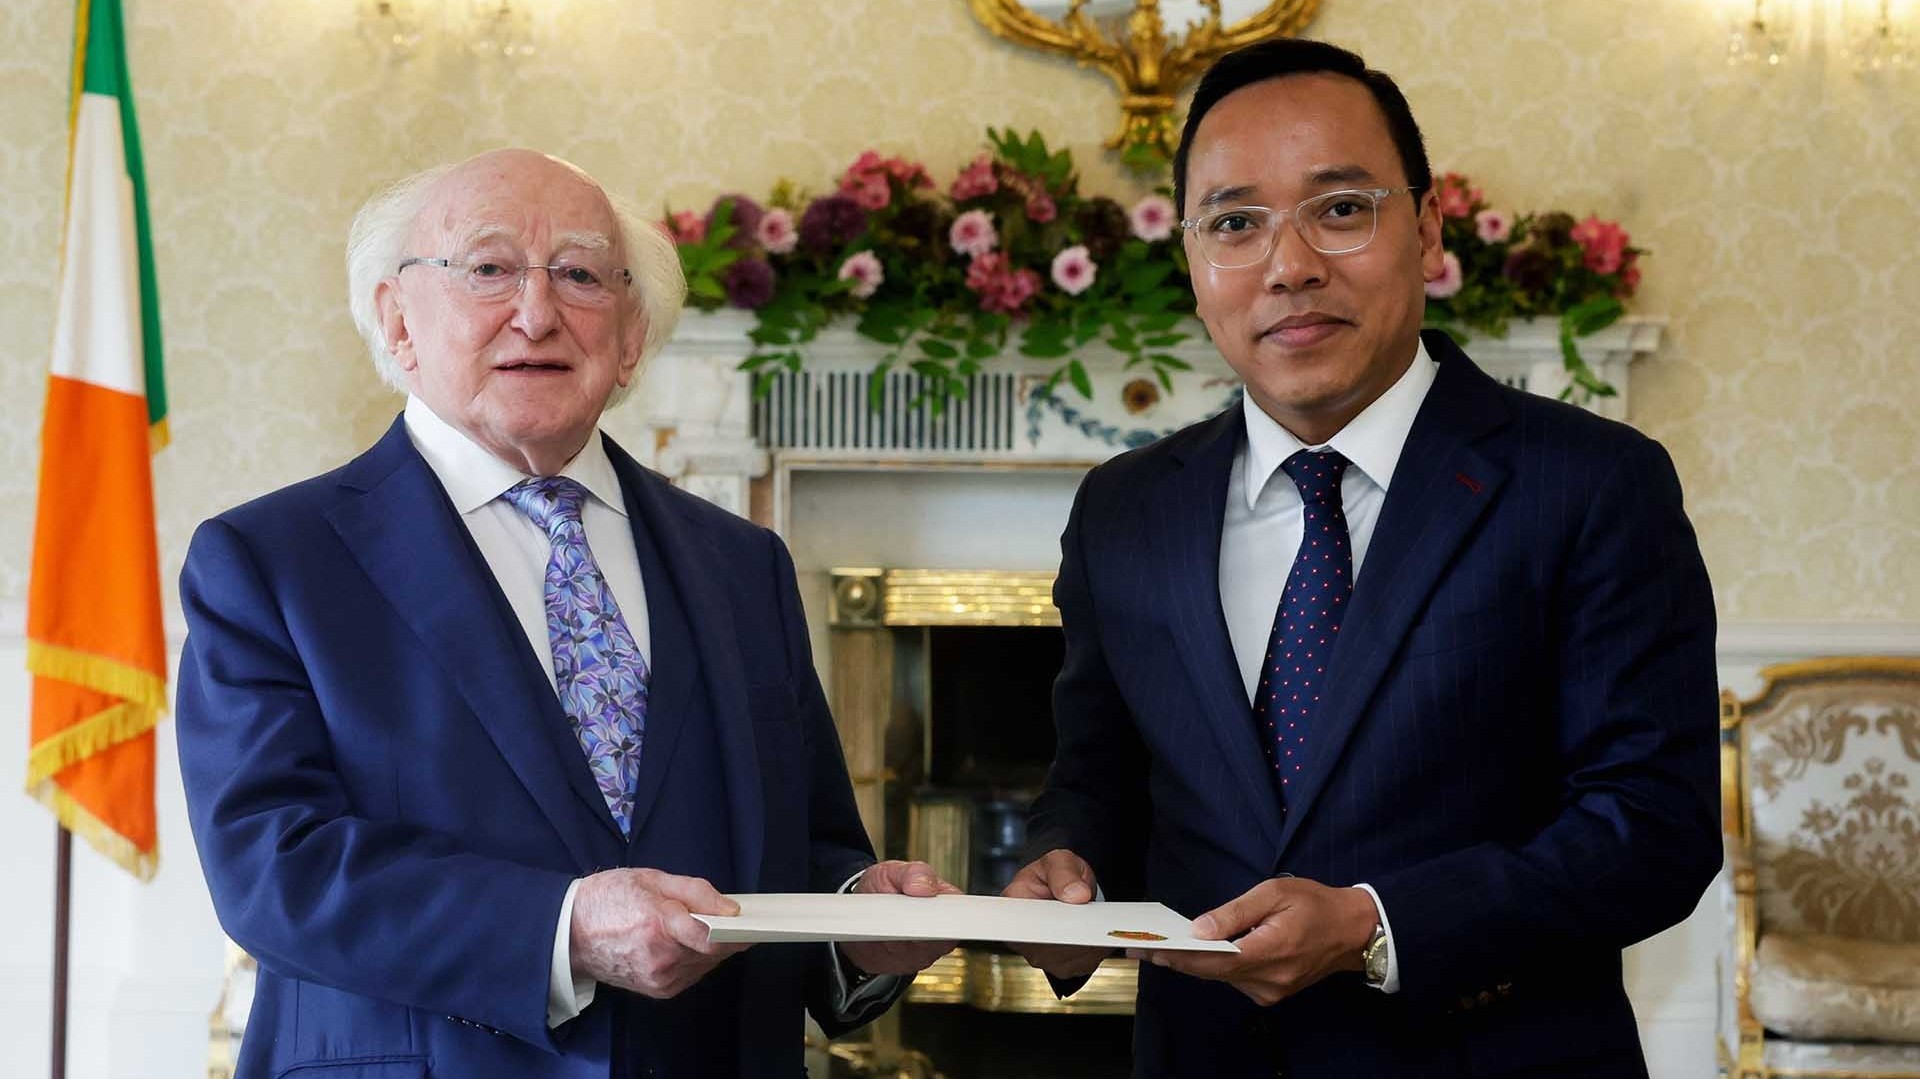 Ambassador Nguyen Hoang Long presents his credential letter to Irish President